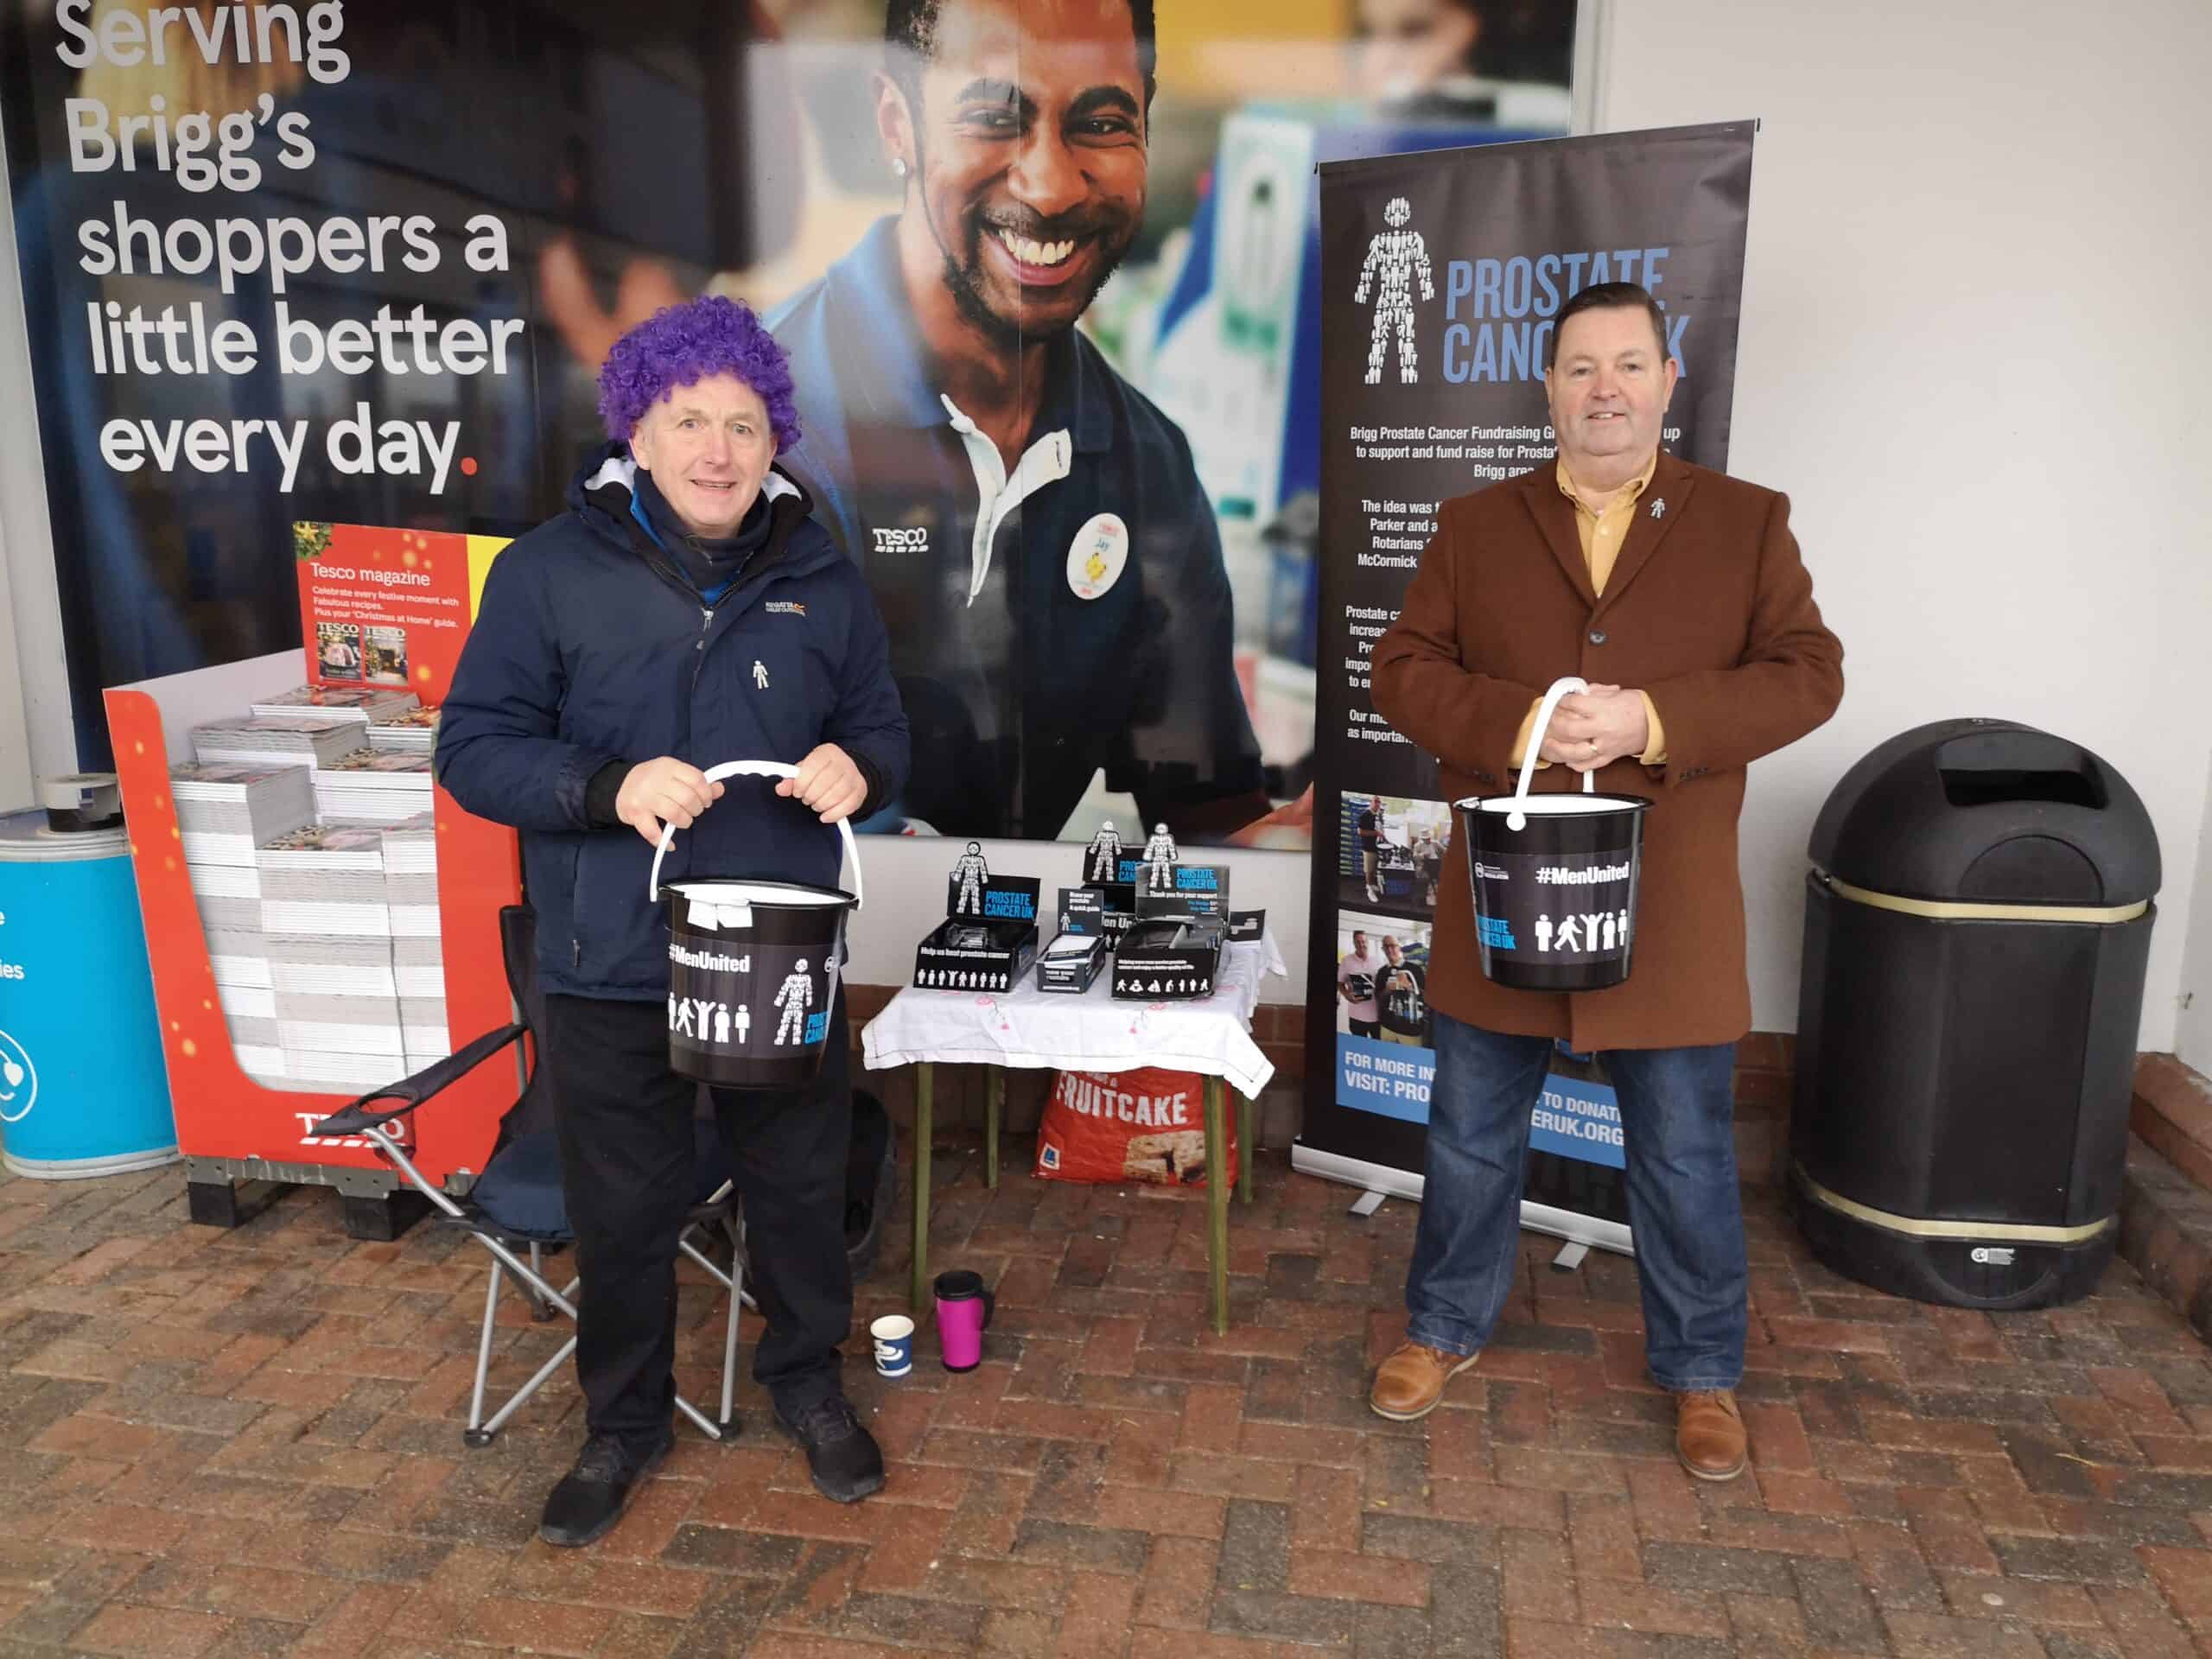 Andrew Markham and a friend raising money for Prostate Cancer UK. They are standing outside a Tesco and holding fundraising buckets. Andrew, who stands on the left, is wearing a purple wig.